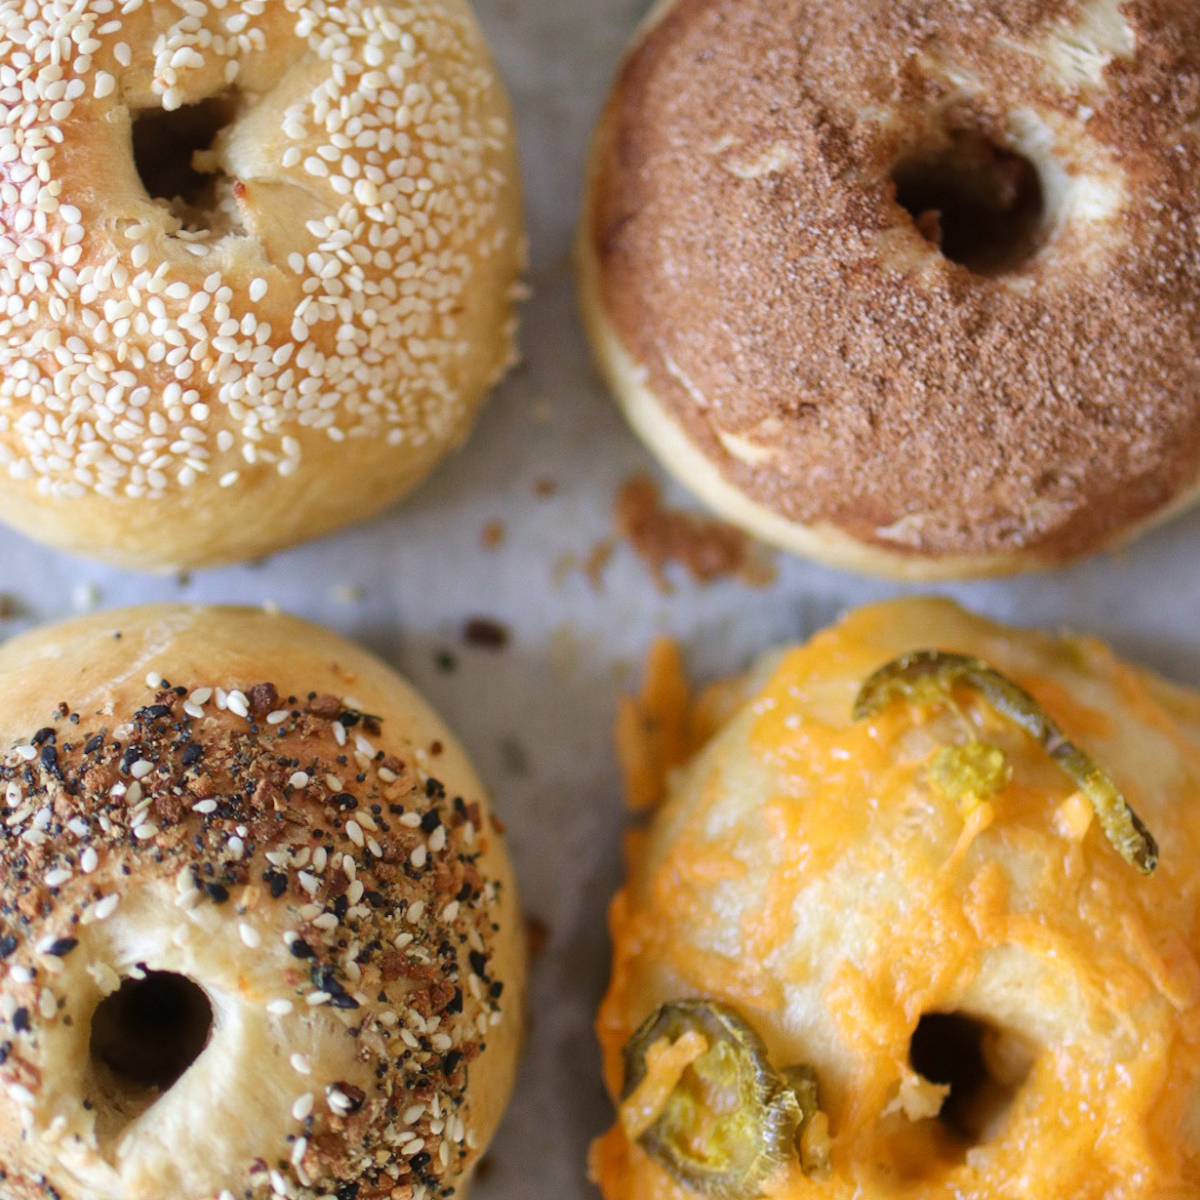 HOW TO MAKE BAGELS USING A BREAD MACHINE